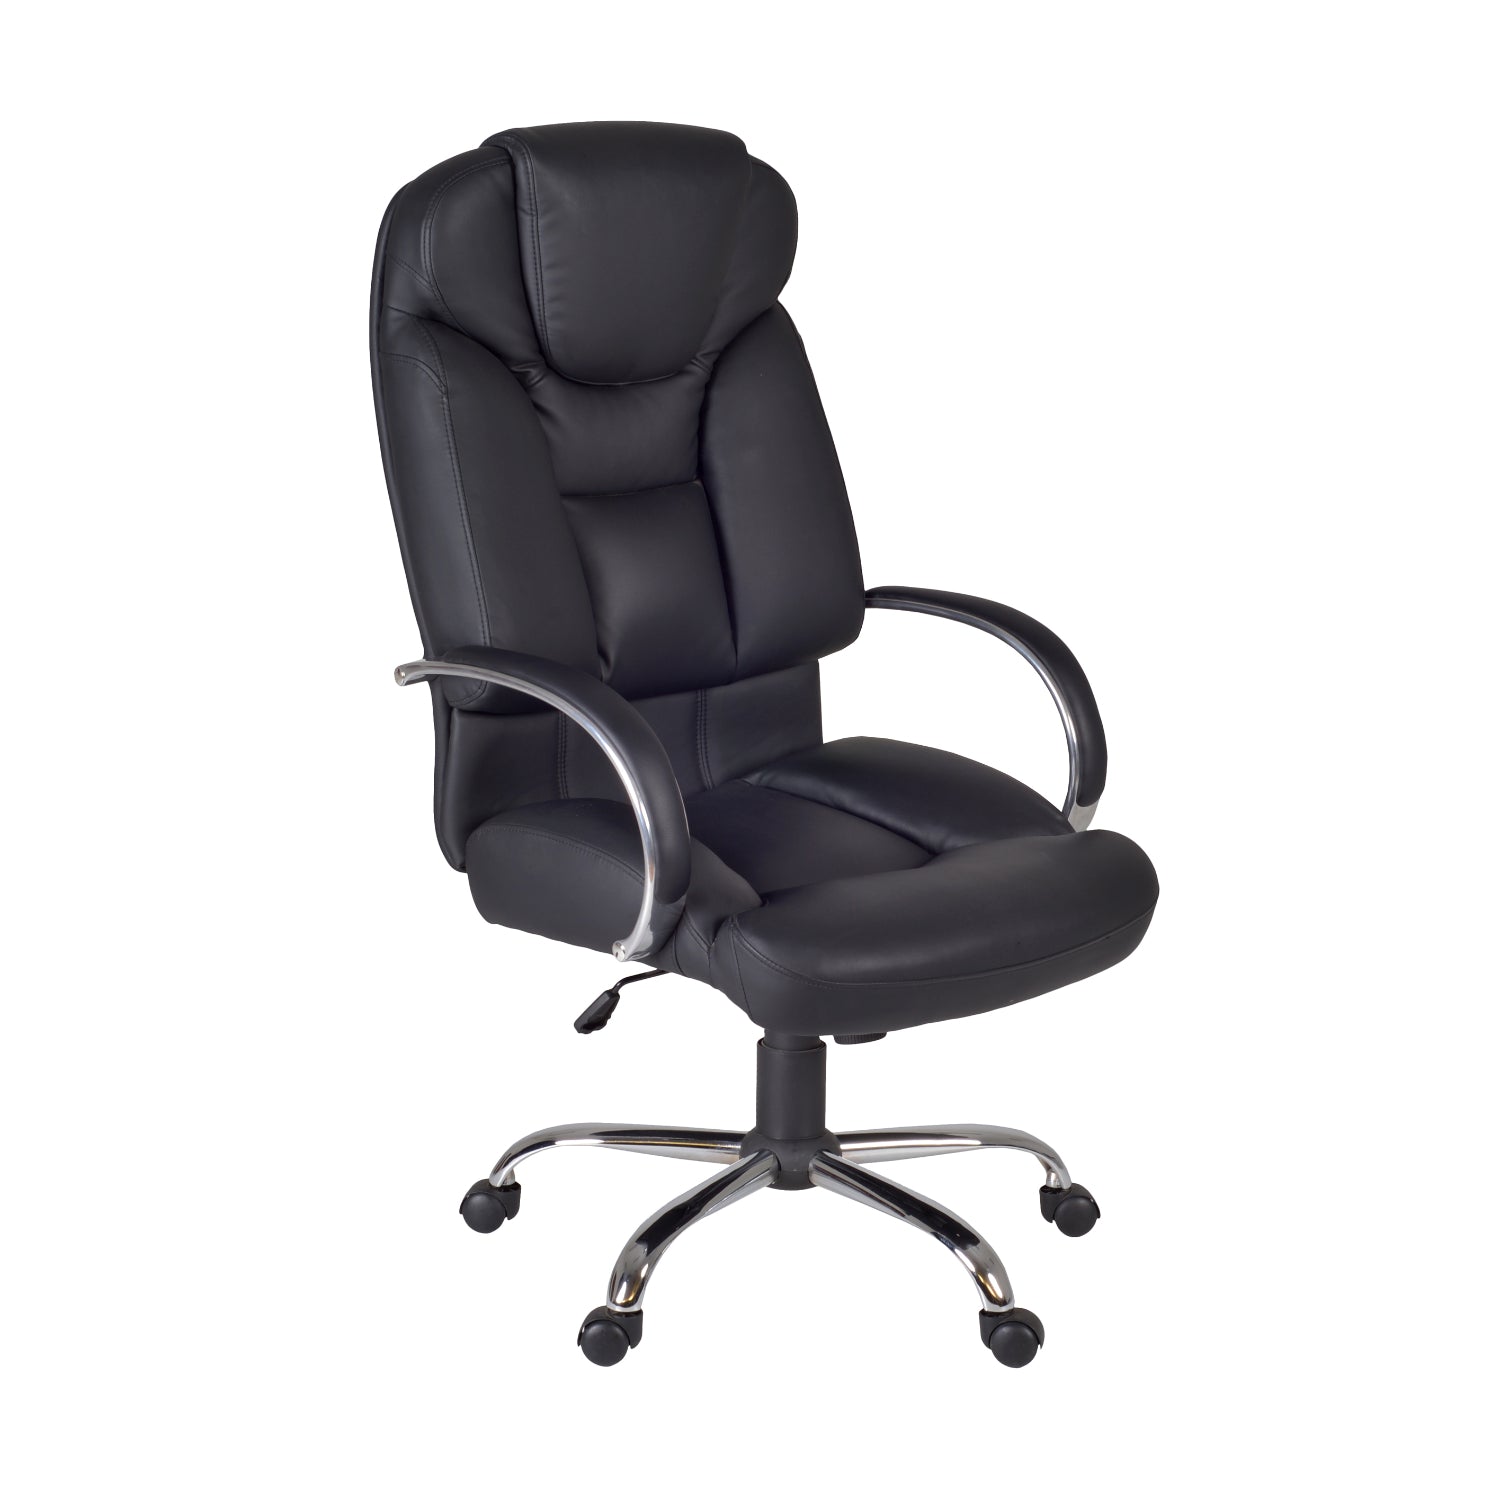 Goliath Big and Tall Leather Swivel Chair